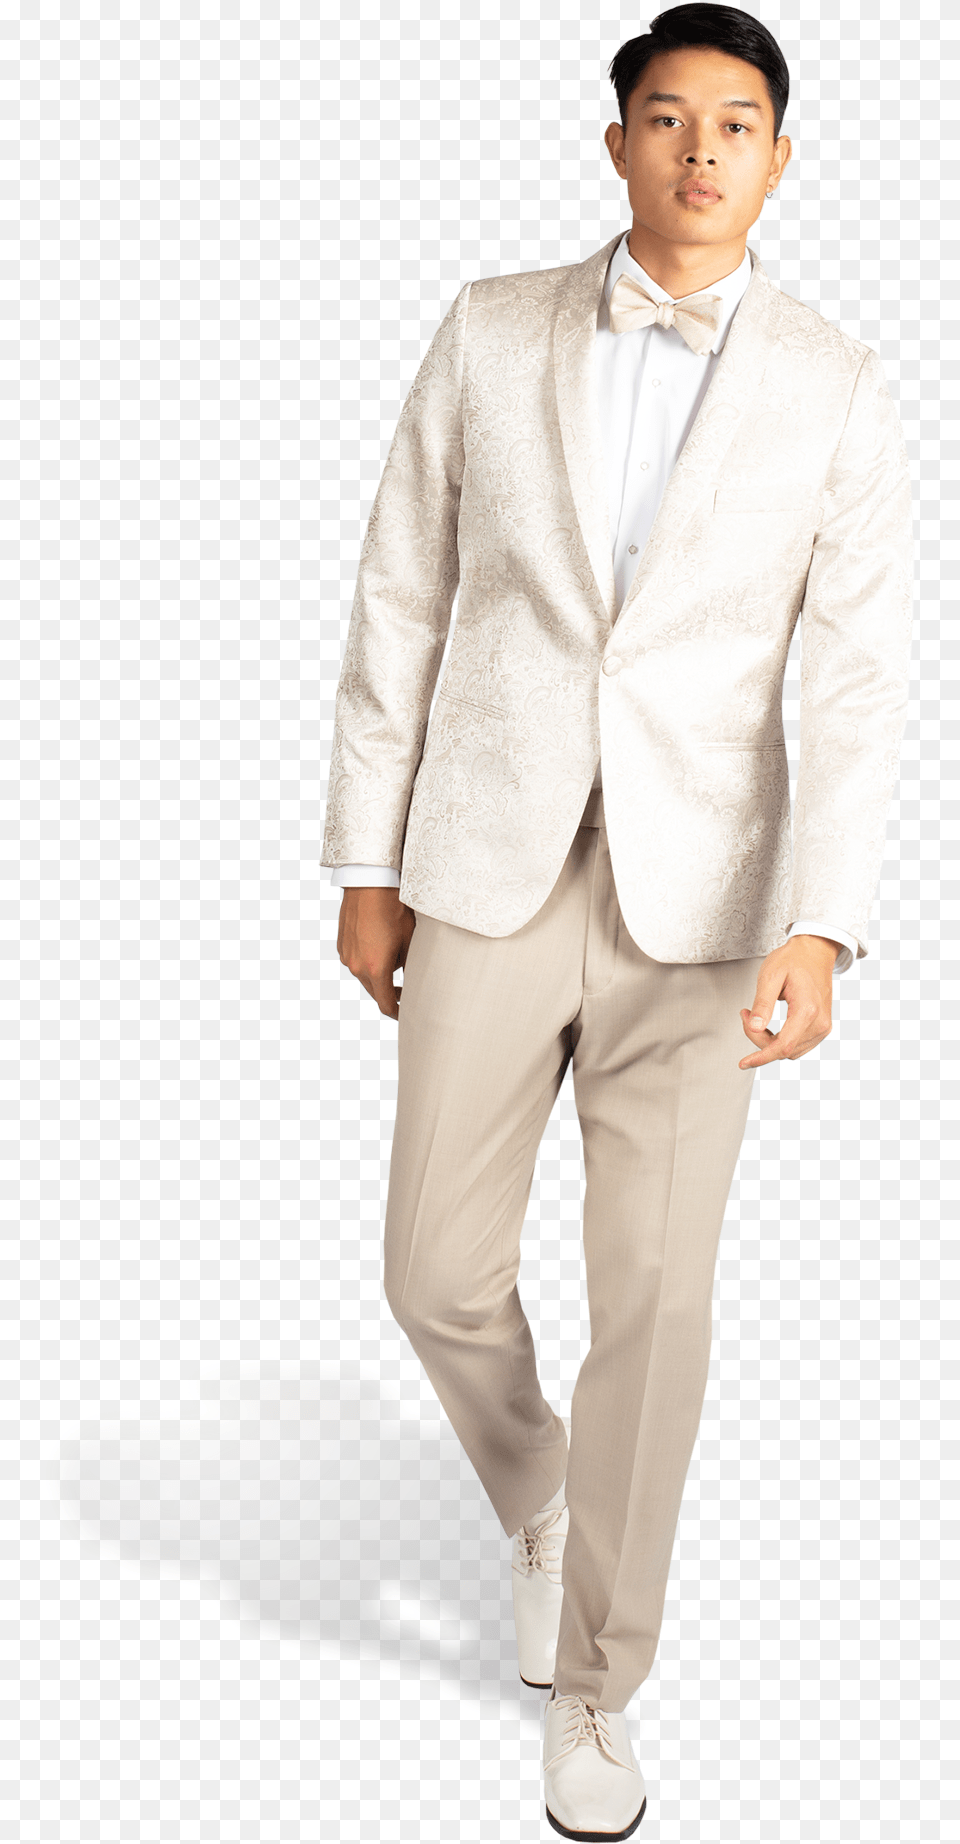 Ivory Paisley Dillon Tuxedo By Midnight Blue Gentleman, Clothing, Suit, Formal Wear, Home Decor Png Image